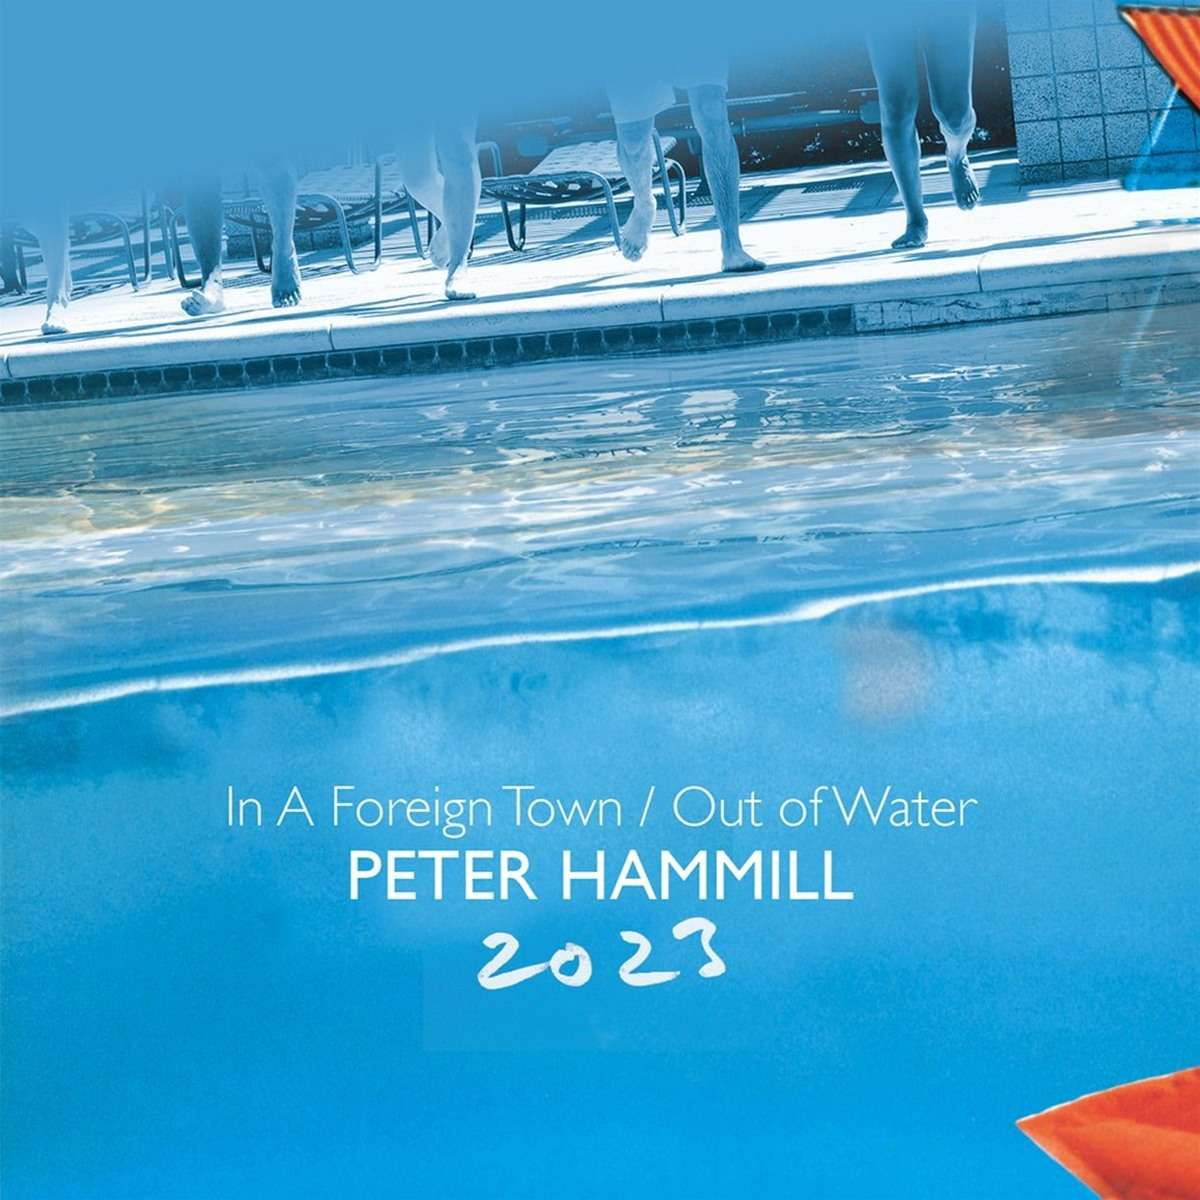 IN A FOREIGN TOWN / OUT OF WATER 2023